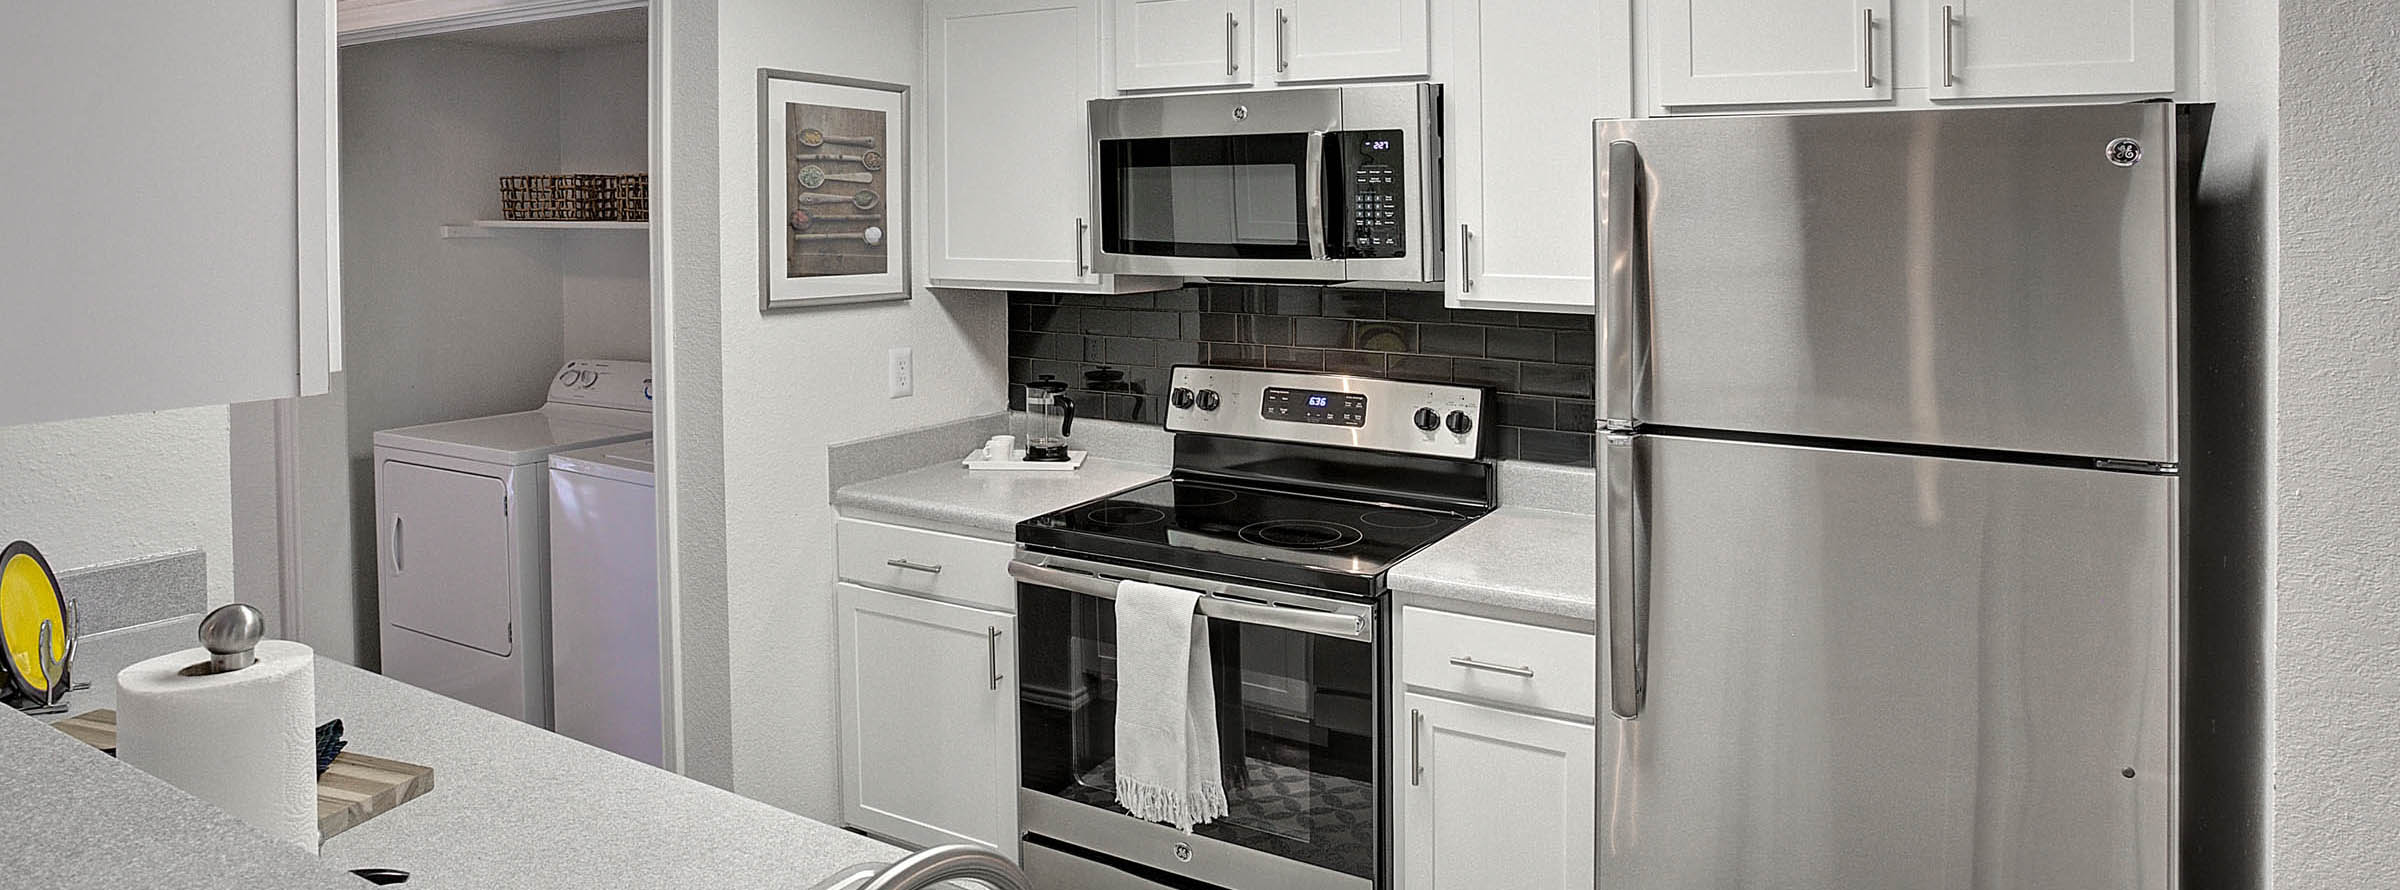 Stainless steel appliances.